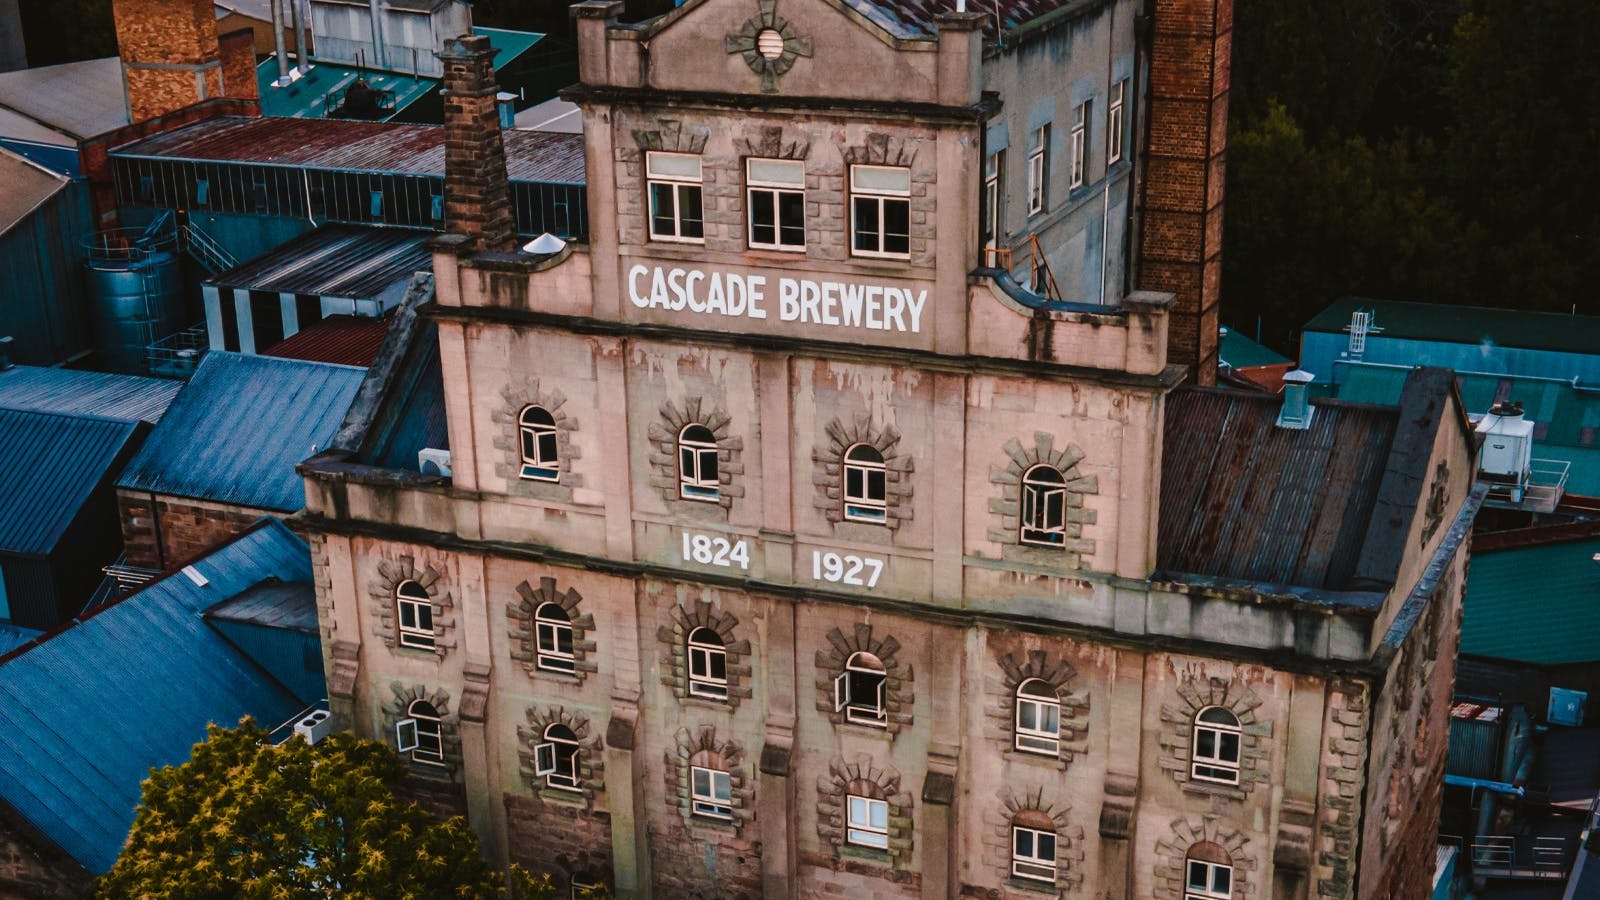 Drone Image of Cascade Brewery